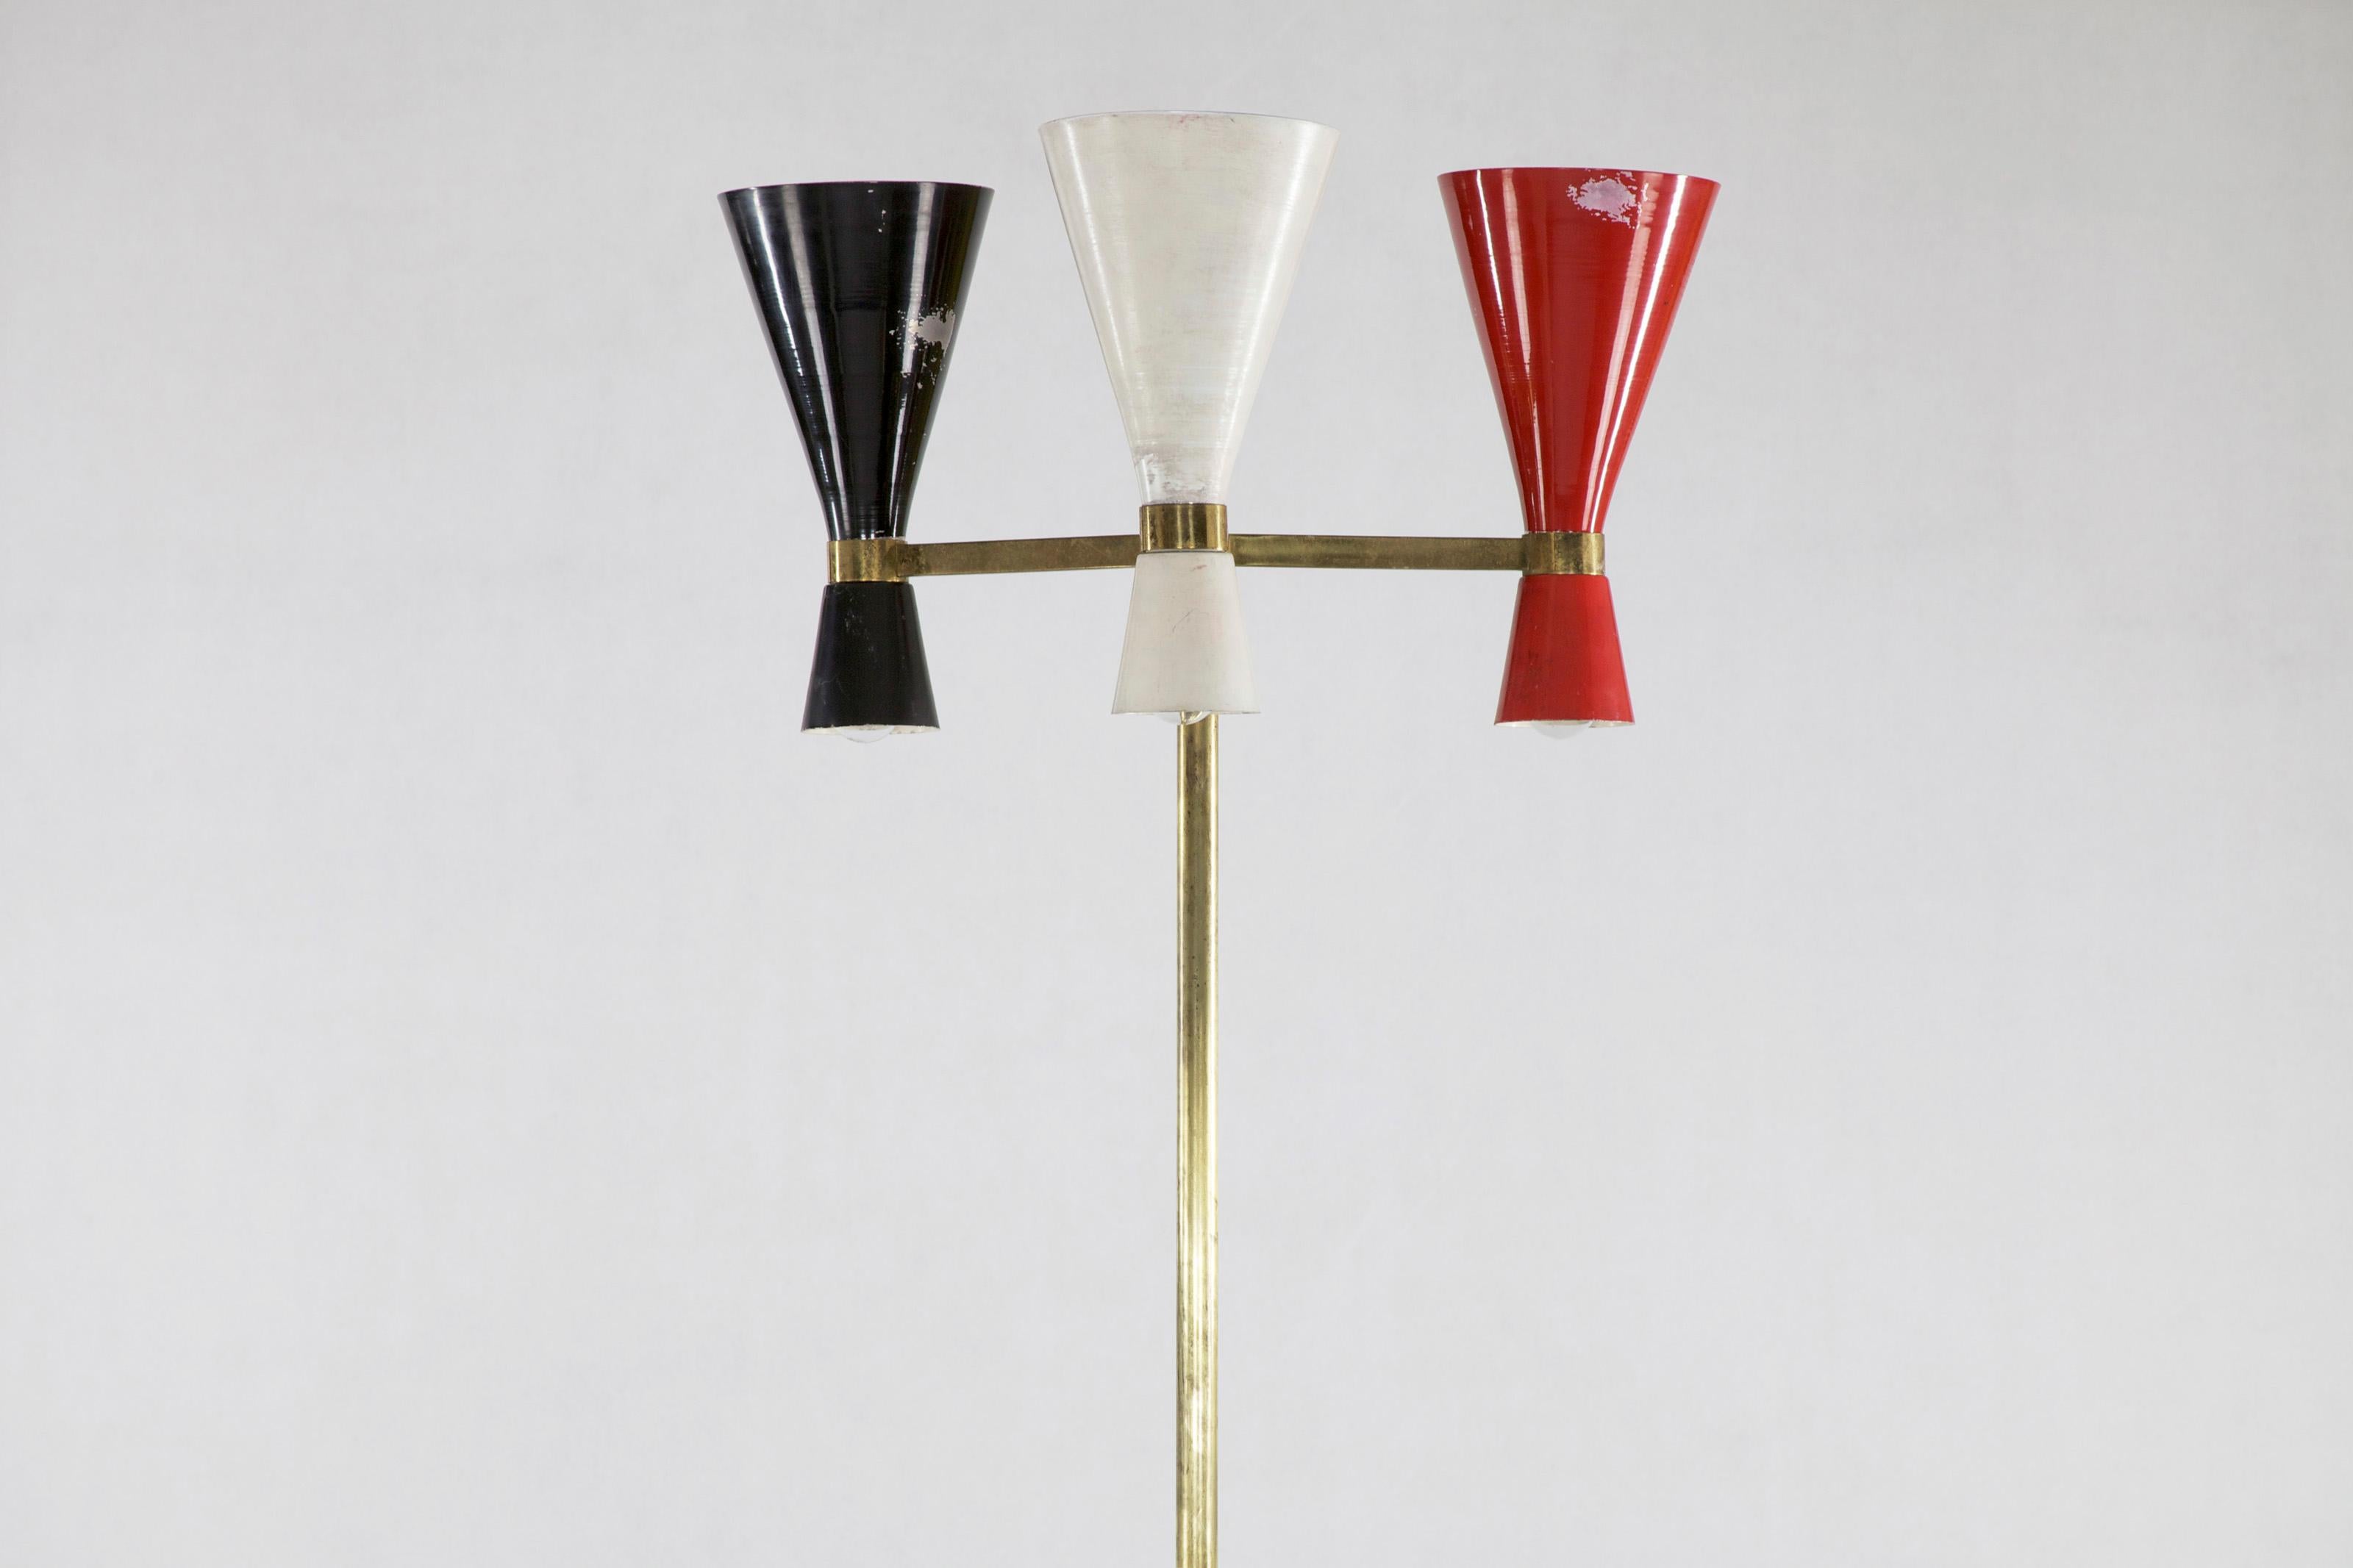 Mid-20th Century Italian Floor Lamp with Red White Black Colored Metal Shades, Marble Base, 1950s For Sale